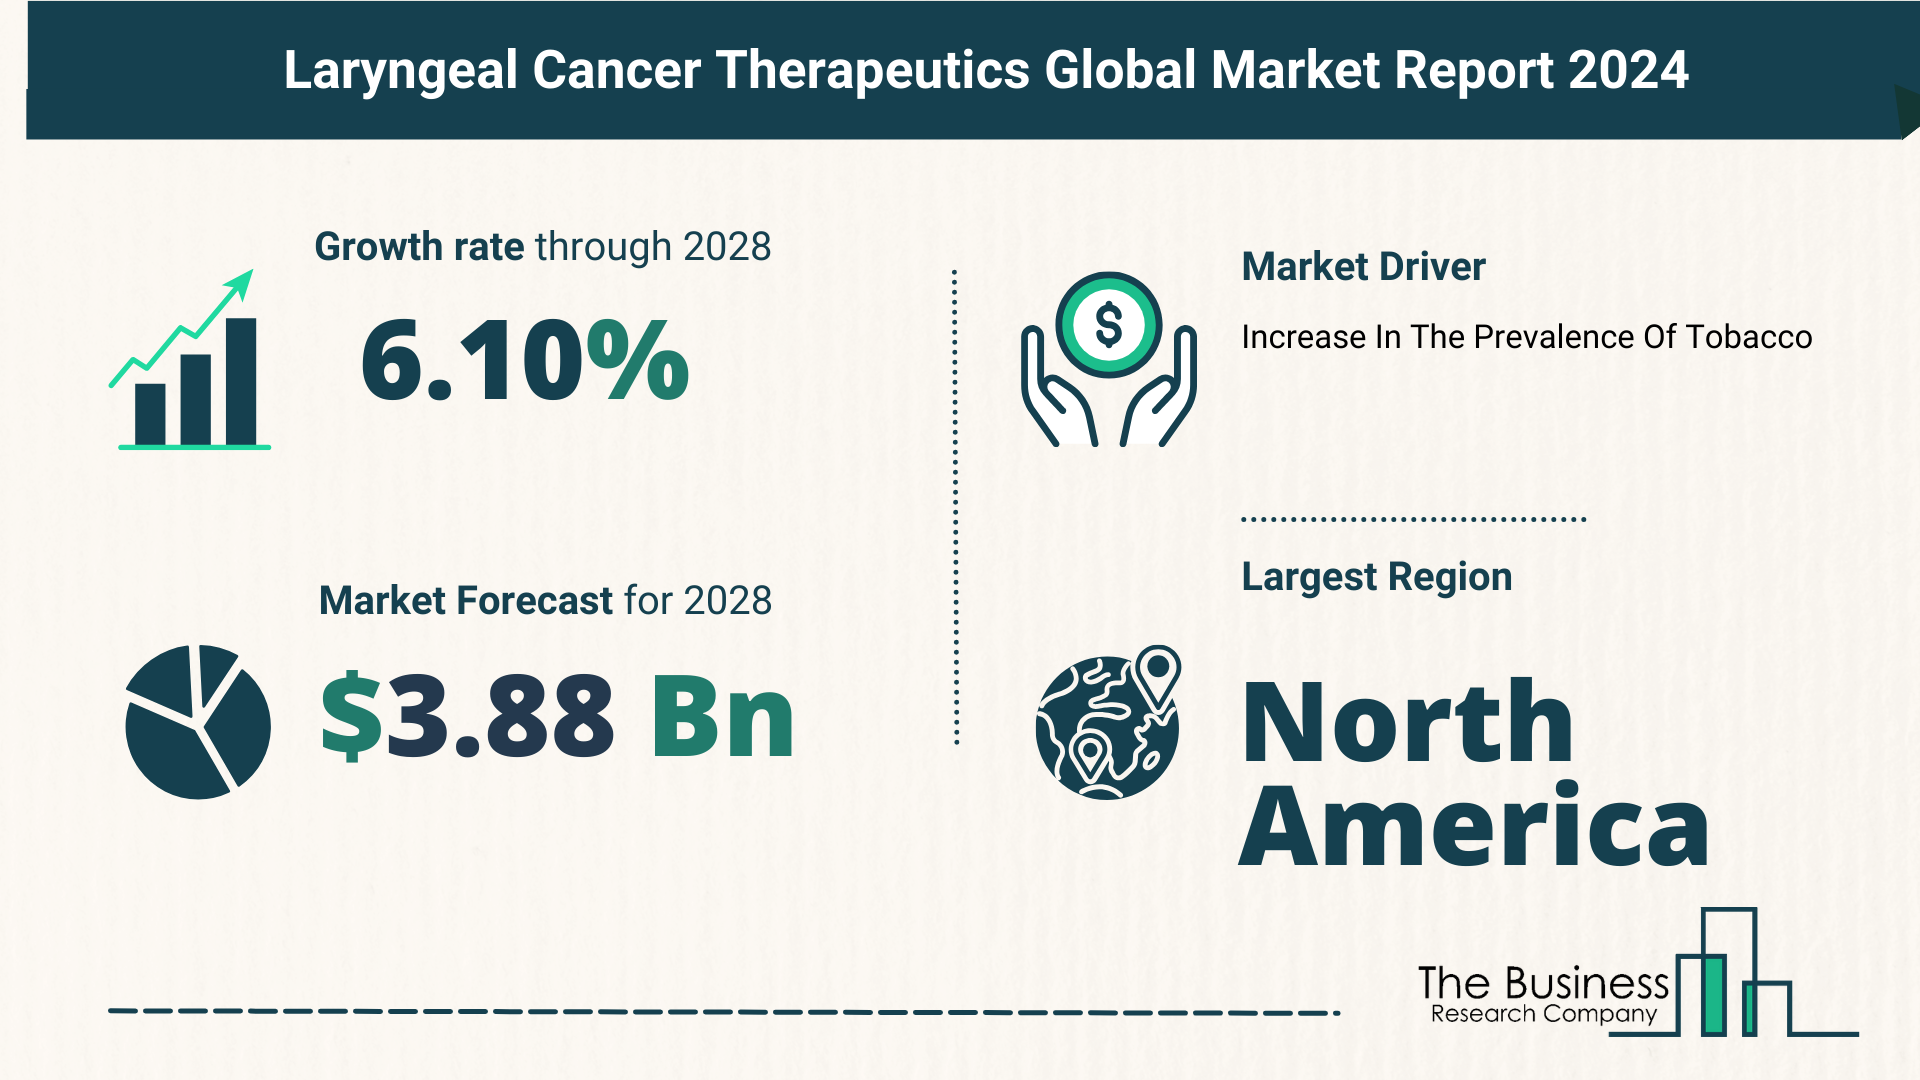 Laryngeal Cancer Therapeutics Market Forecast Until 2033 – Estimated Market Size And Growth Rate